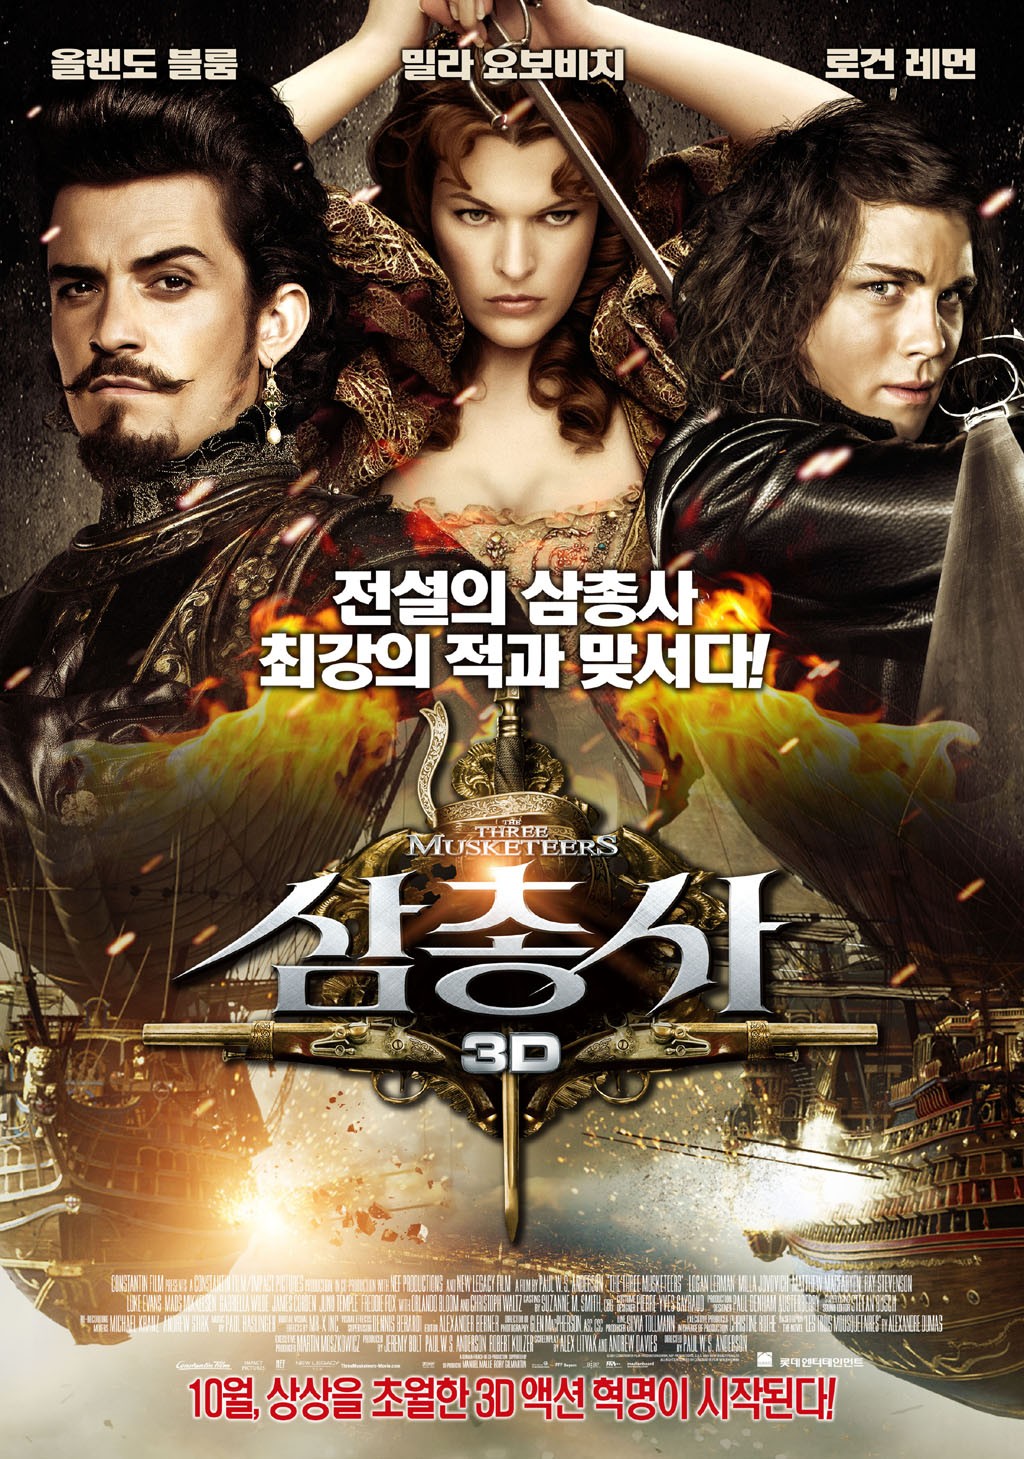 Extra Large Movie Poster Image for The Three Musketeers (#28 of 31)